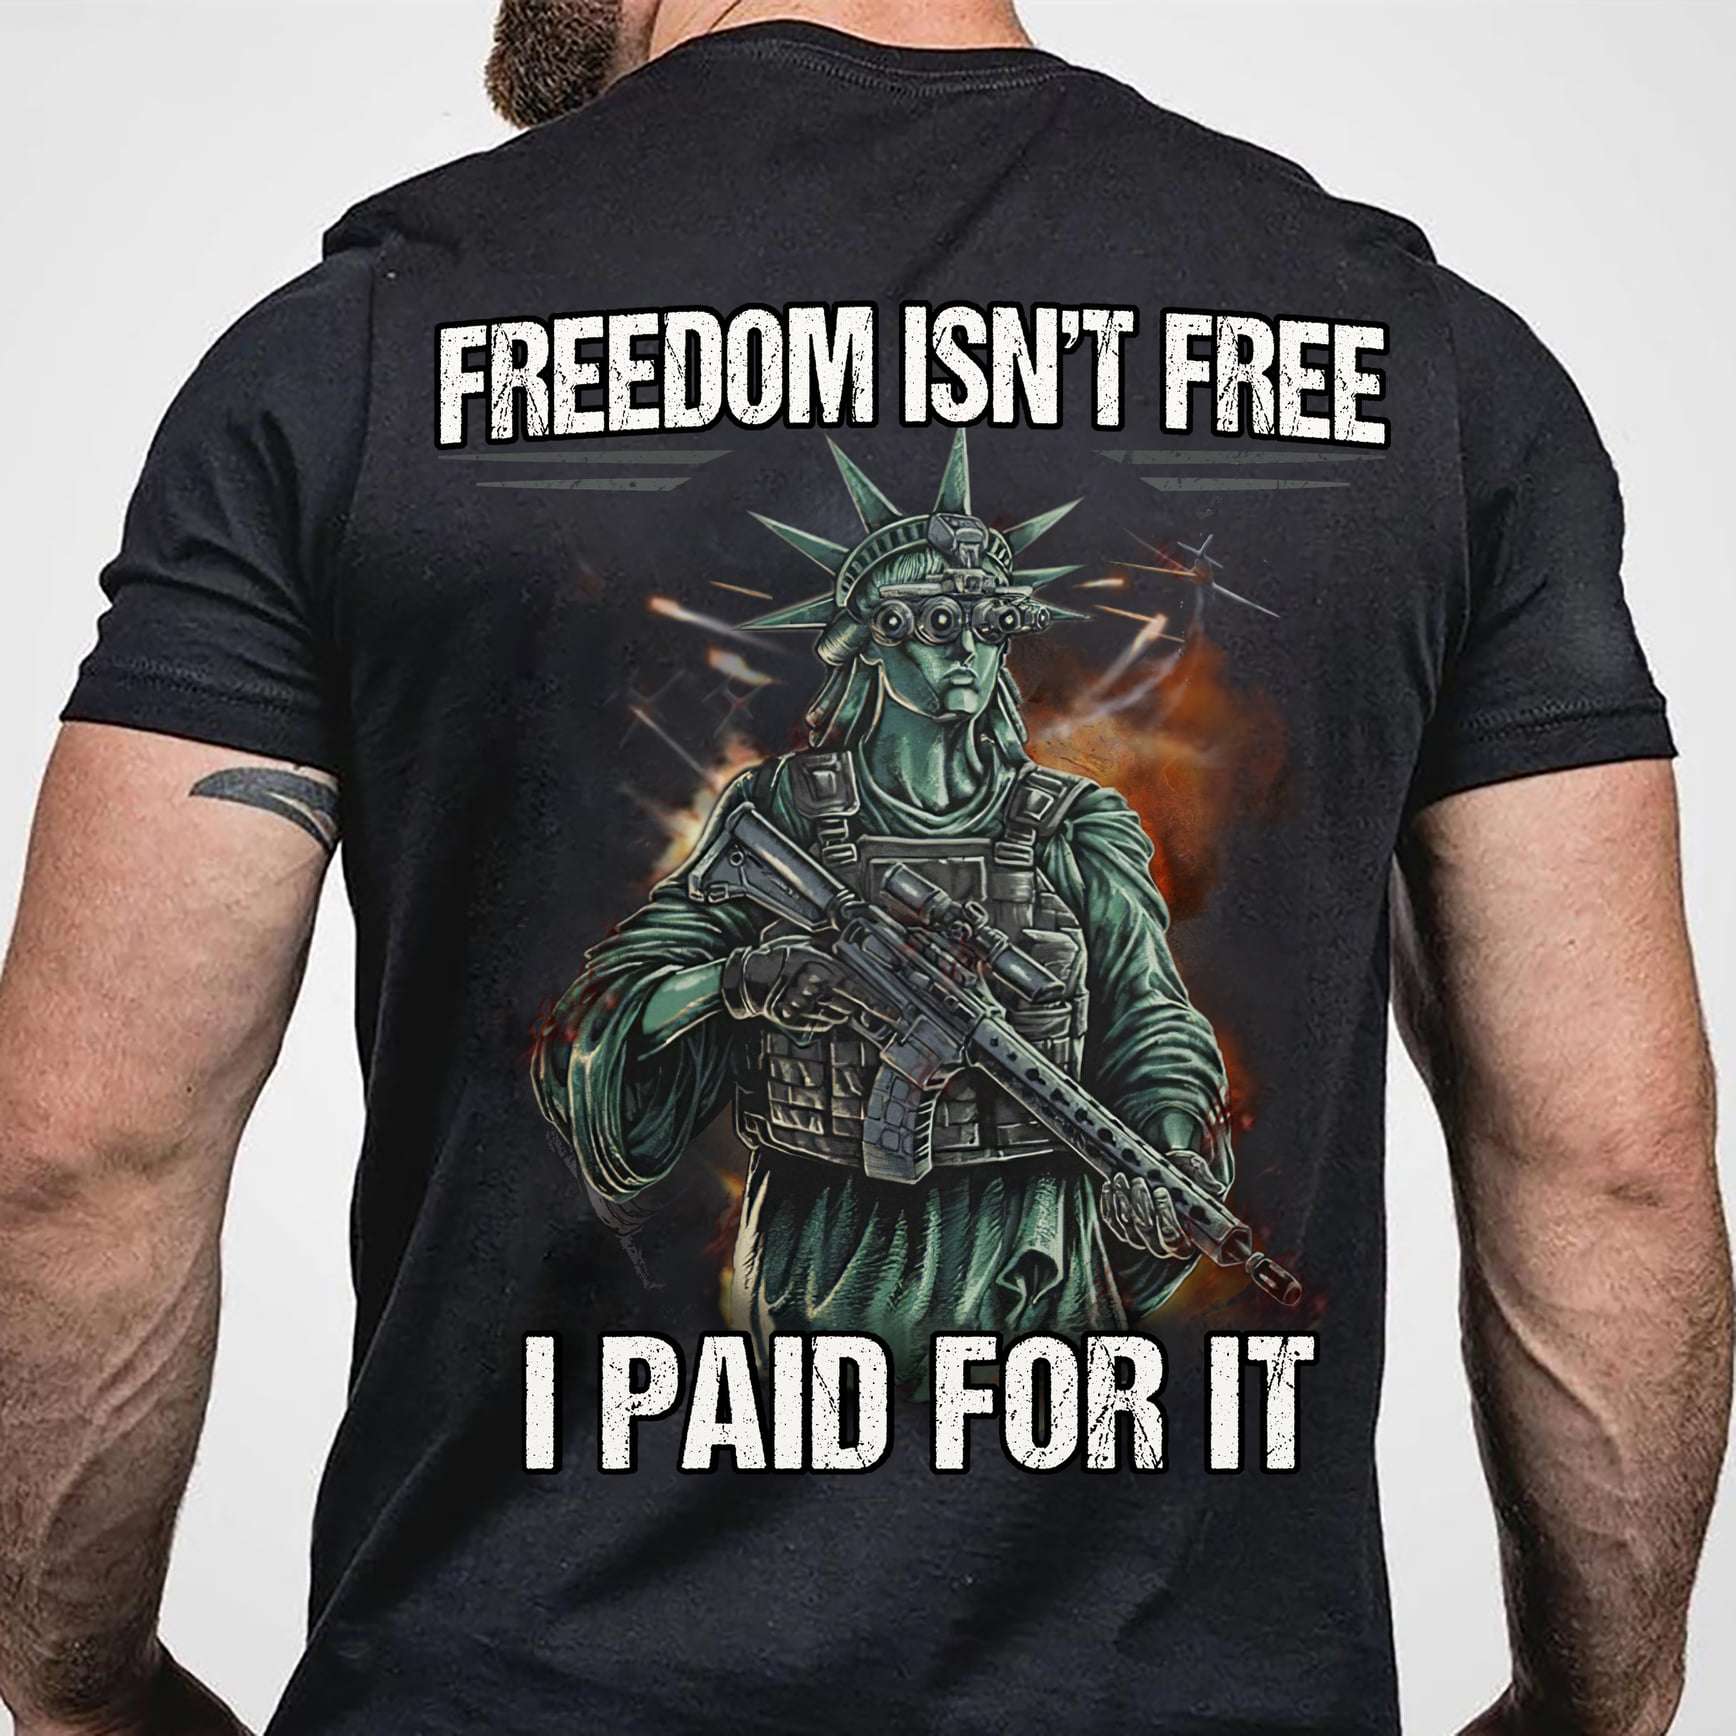 Freedom isn't free I paid for it - Statue of Liberty, Armed Statue